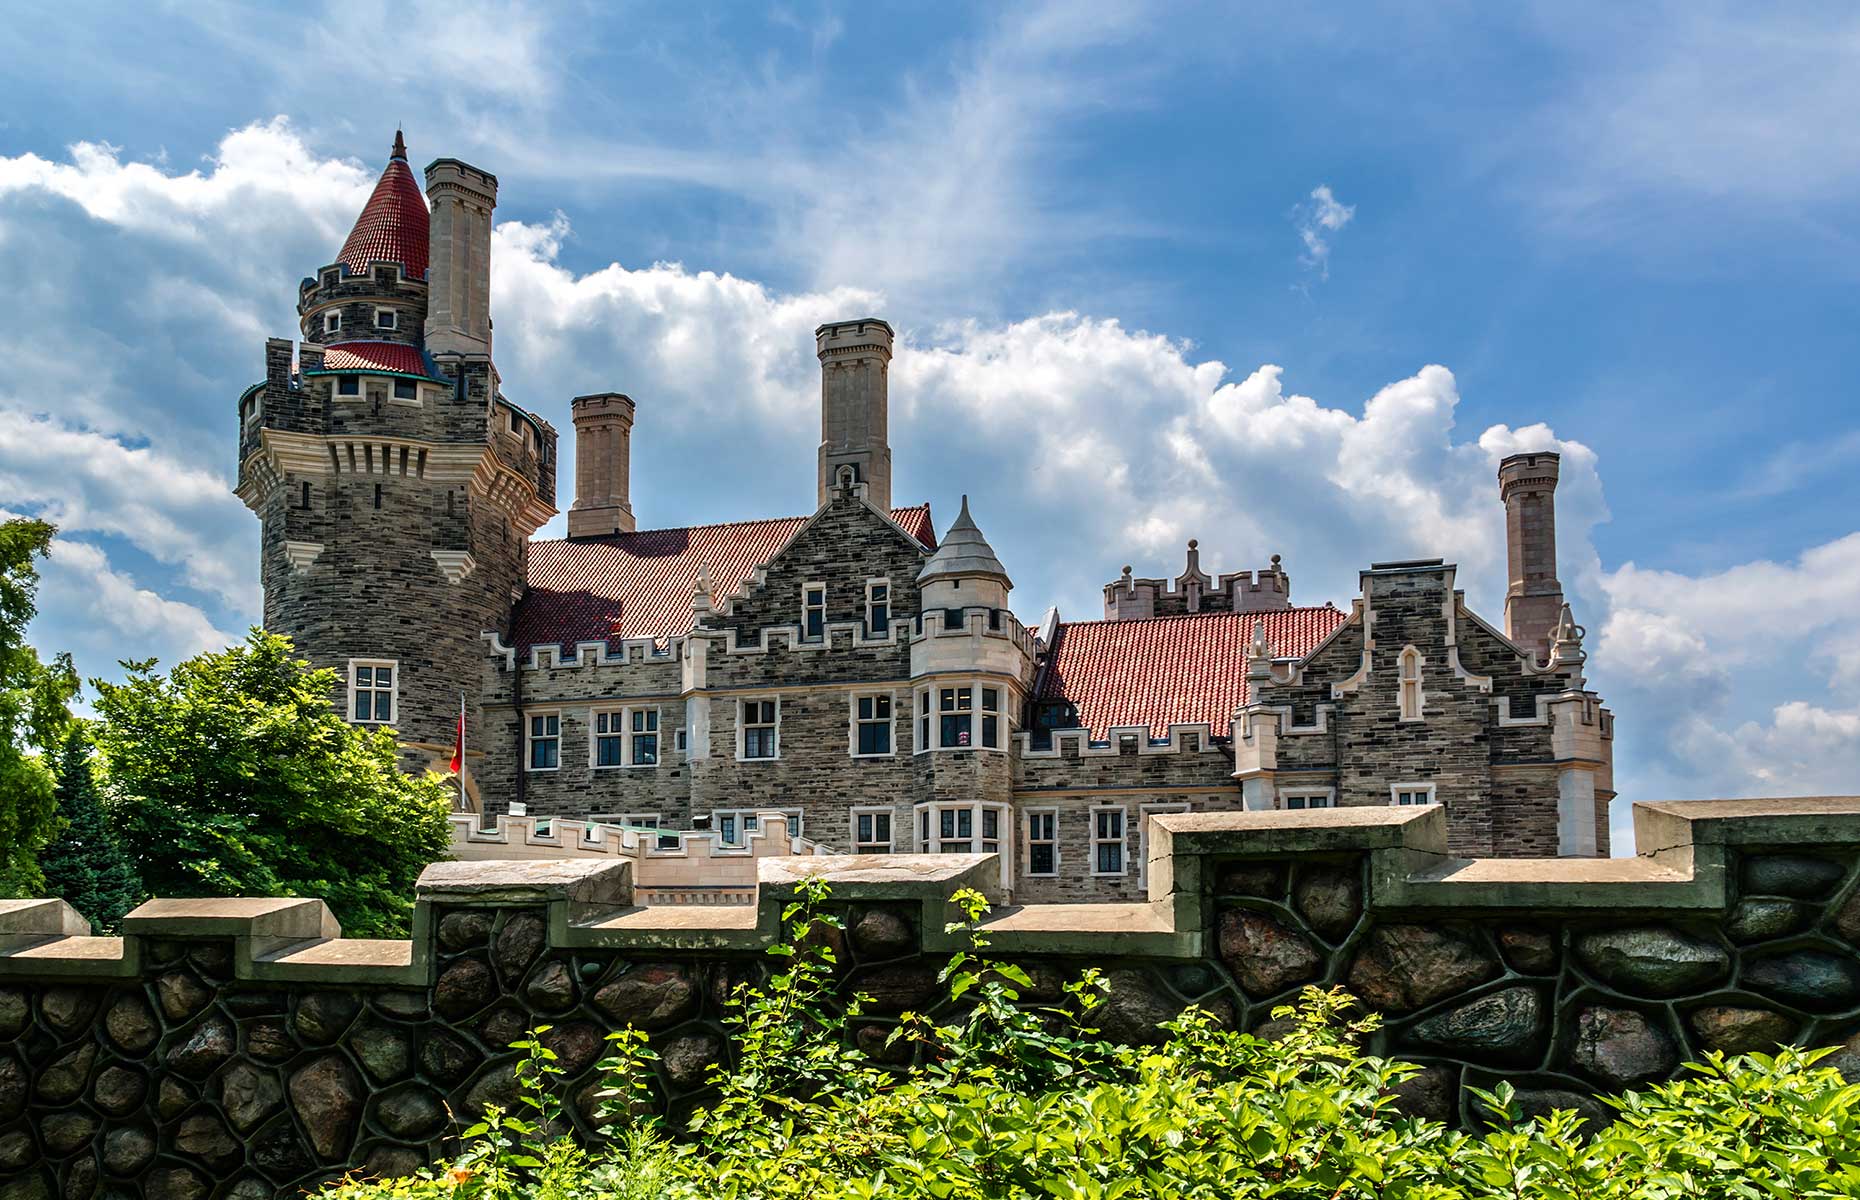 Casa Loma, Toronto, is in the South Hill district